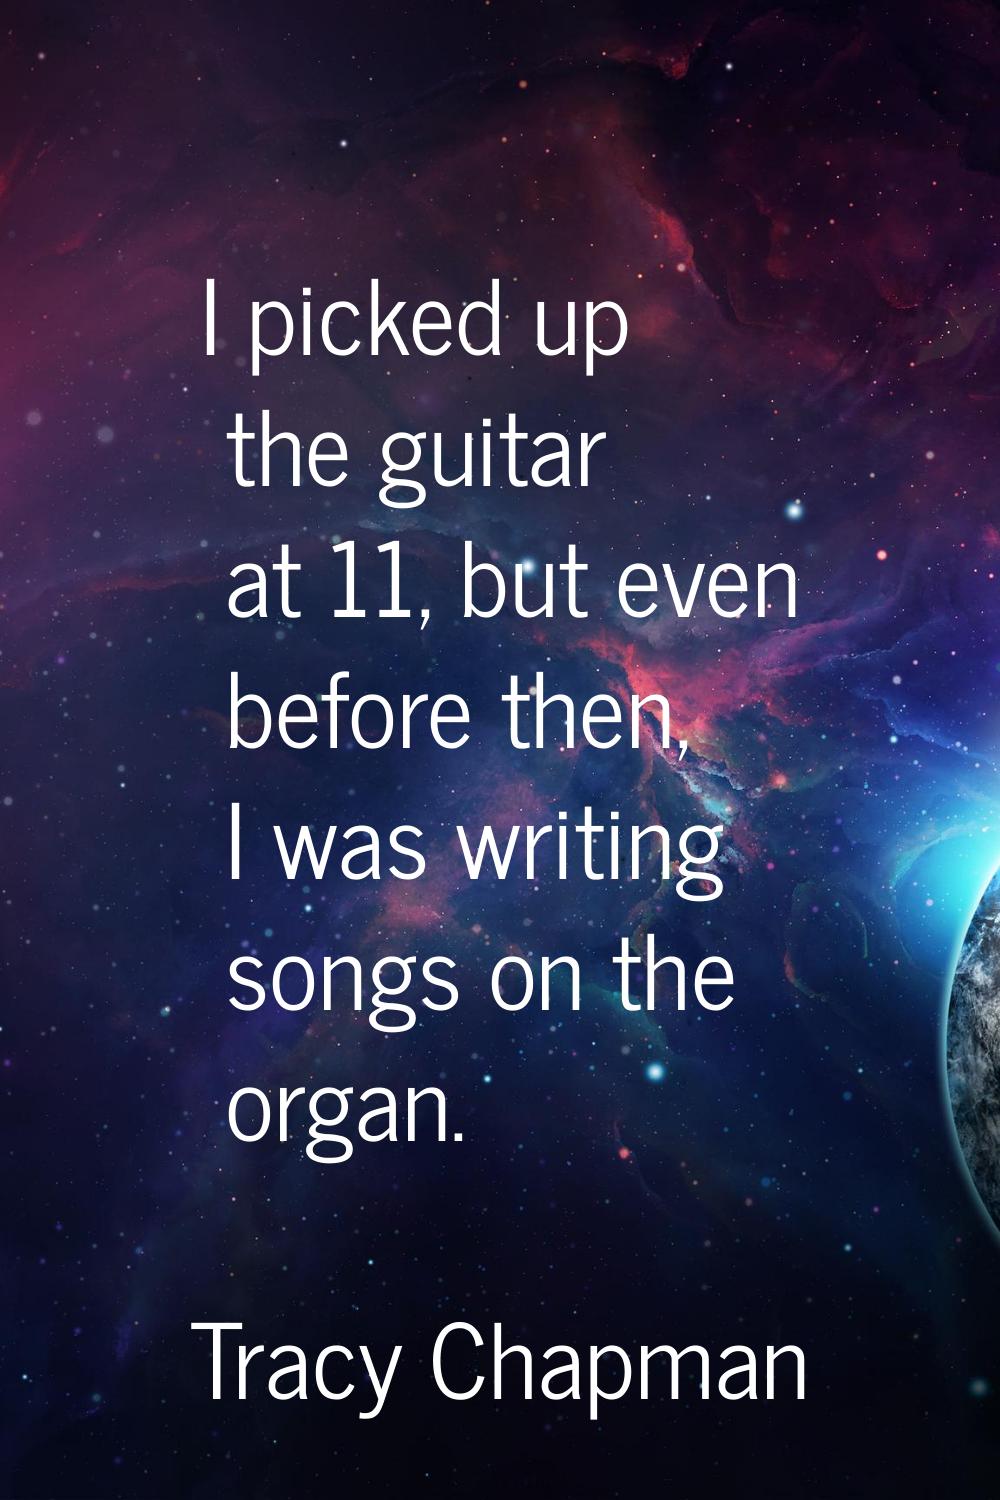 I picked up the guitar at 11, but even before then, I was writing songs on the organ.